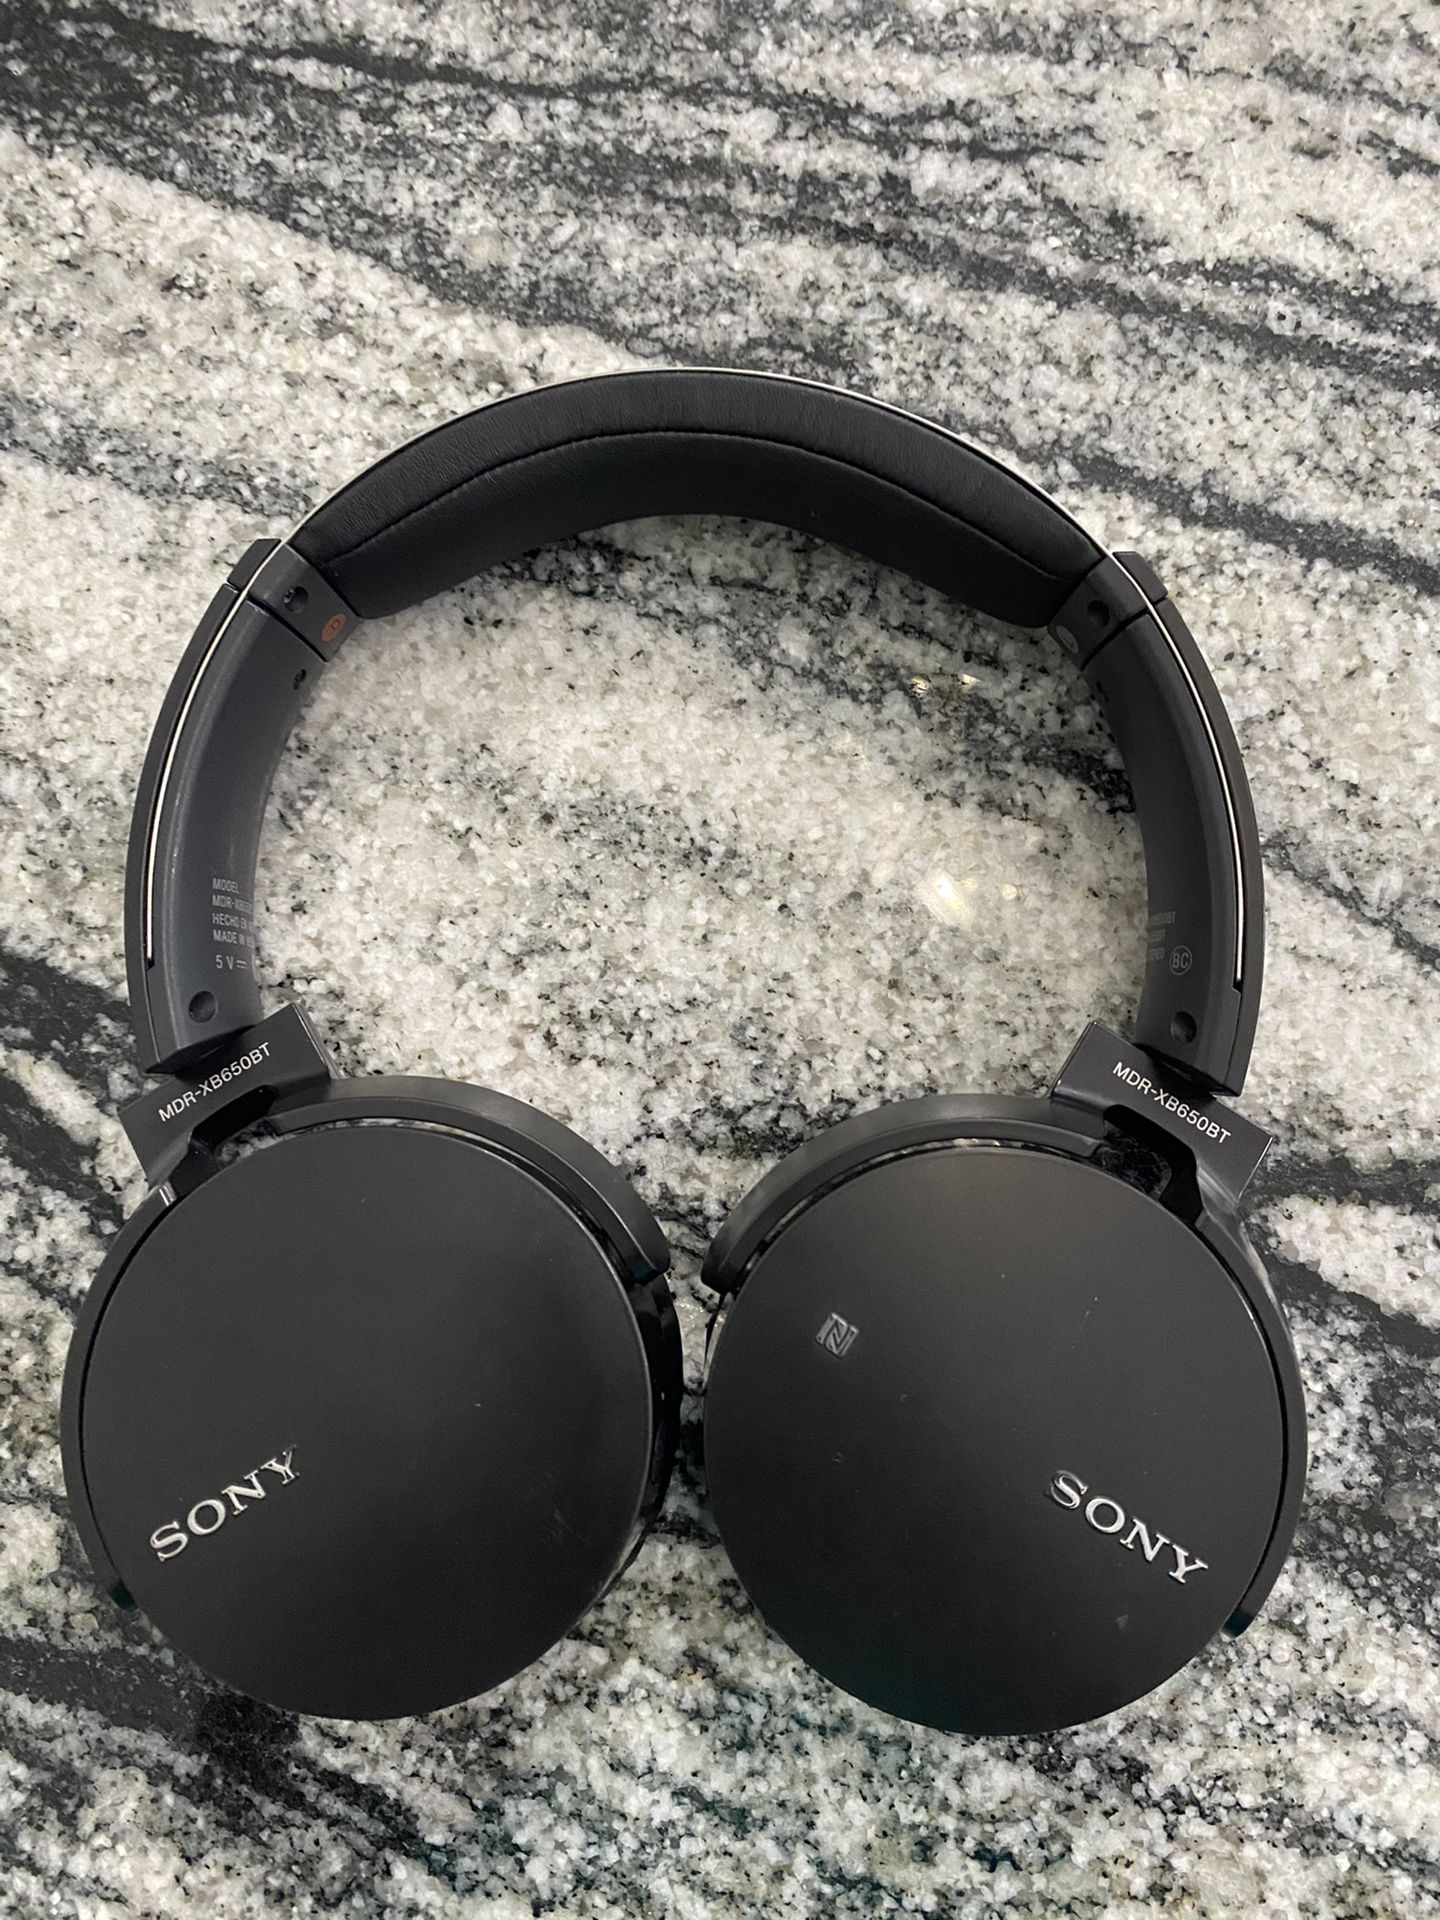 Great Sony noise canceling headphones! MDR-XB650BT